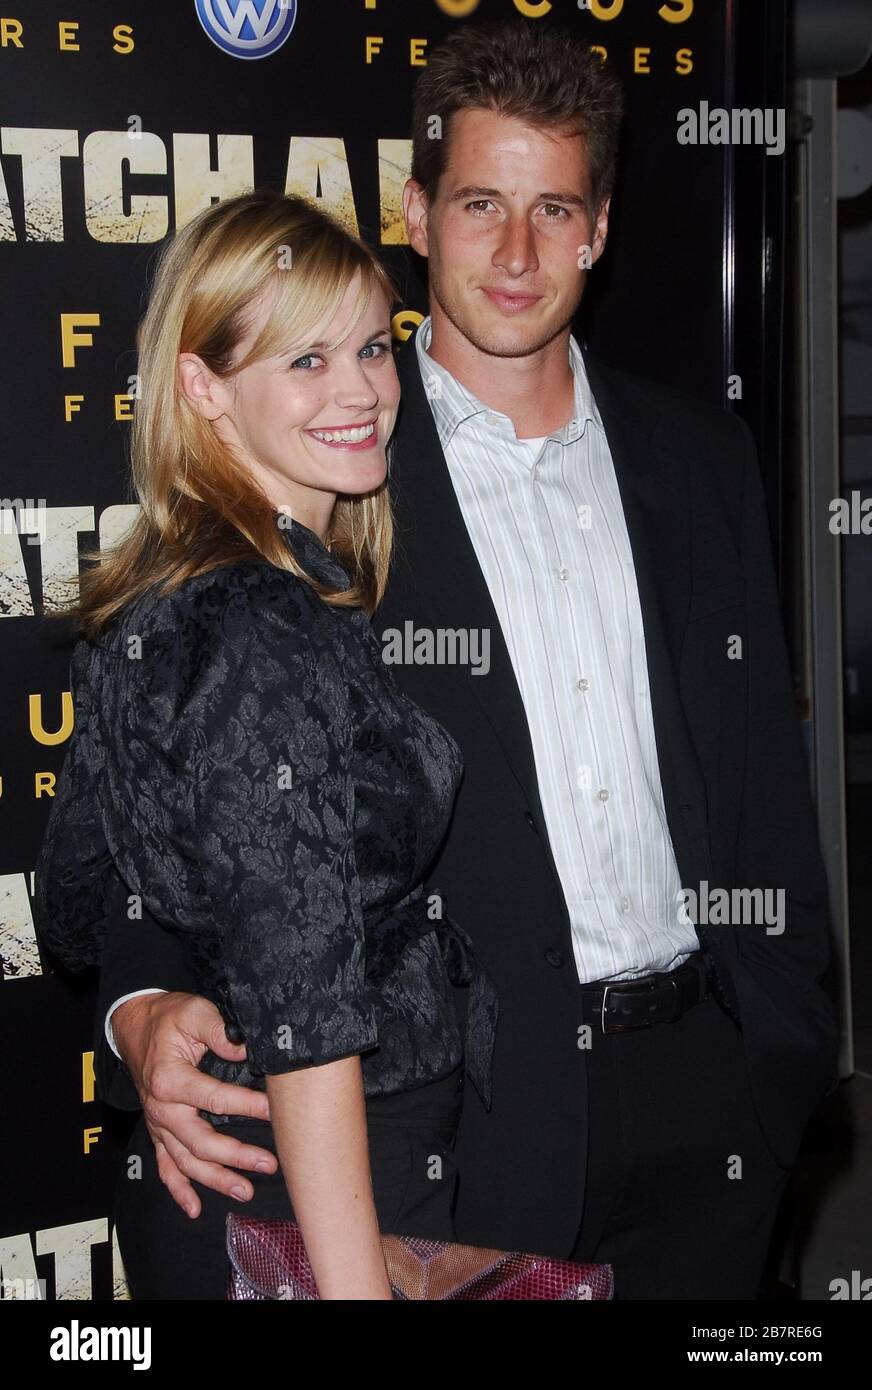 Brendan Fehr and Wife Jennifer Rowley at the Los Angeles Premiere of "Catch A Fire" held at the Arclight Cinemas in Hollywood, CA. The event took place on Wednesday, October 25, 2006.  Photo by: SBM / PictureLux - File Reference # 33984-8251SBMPLX Stock Photo